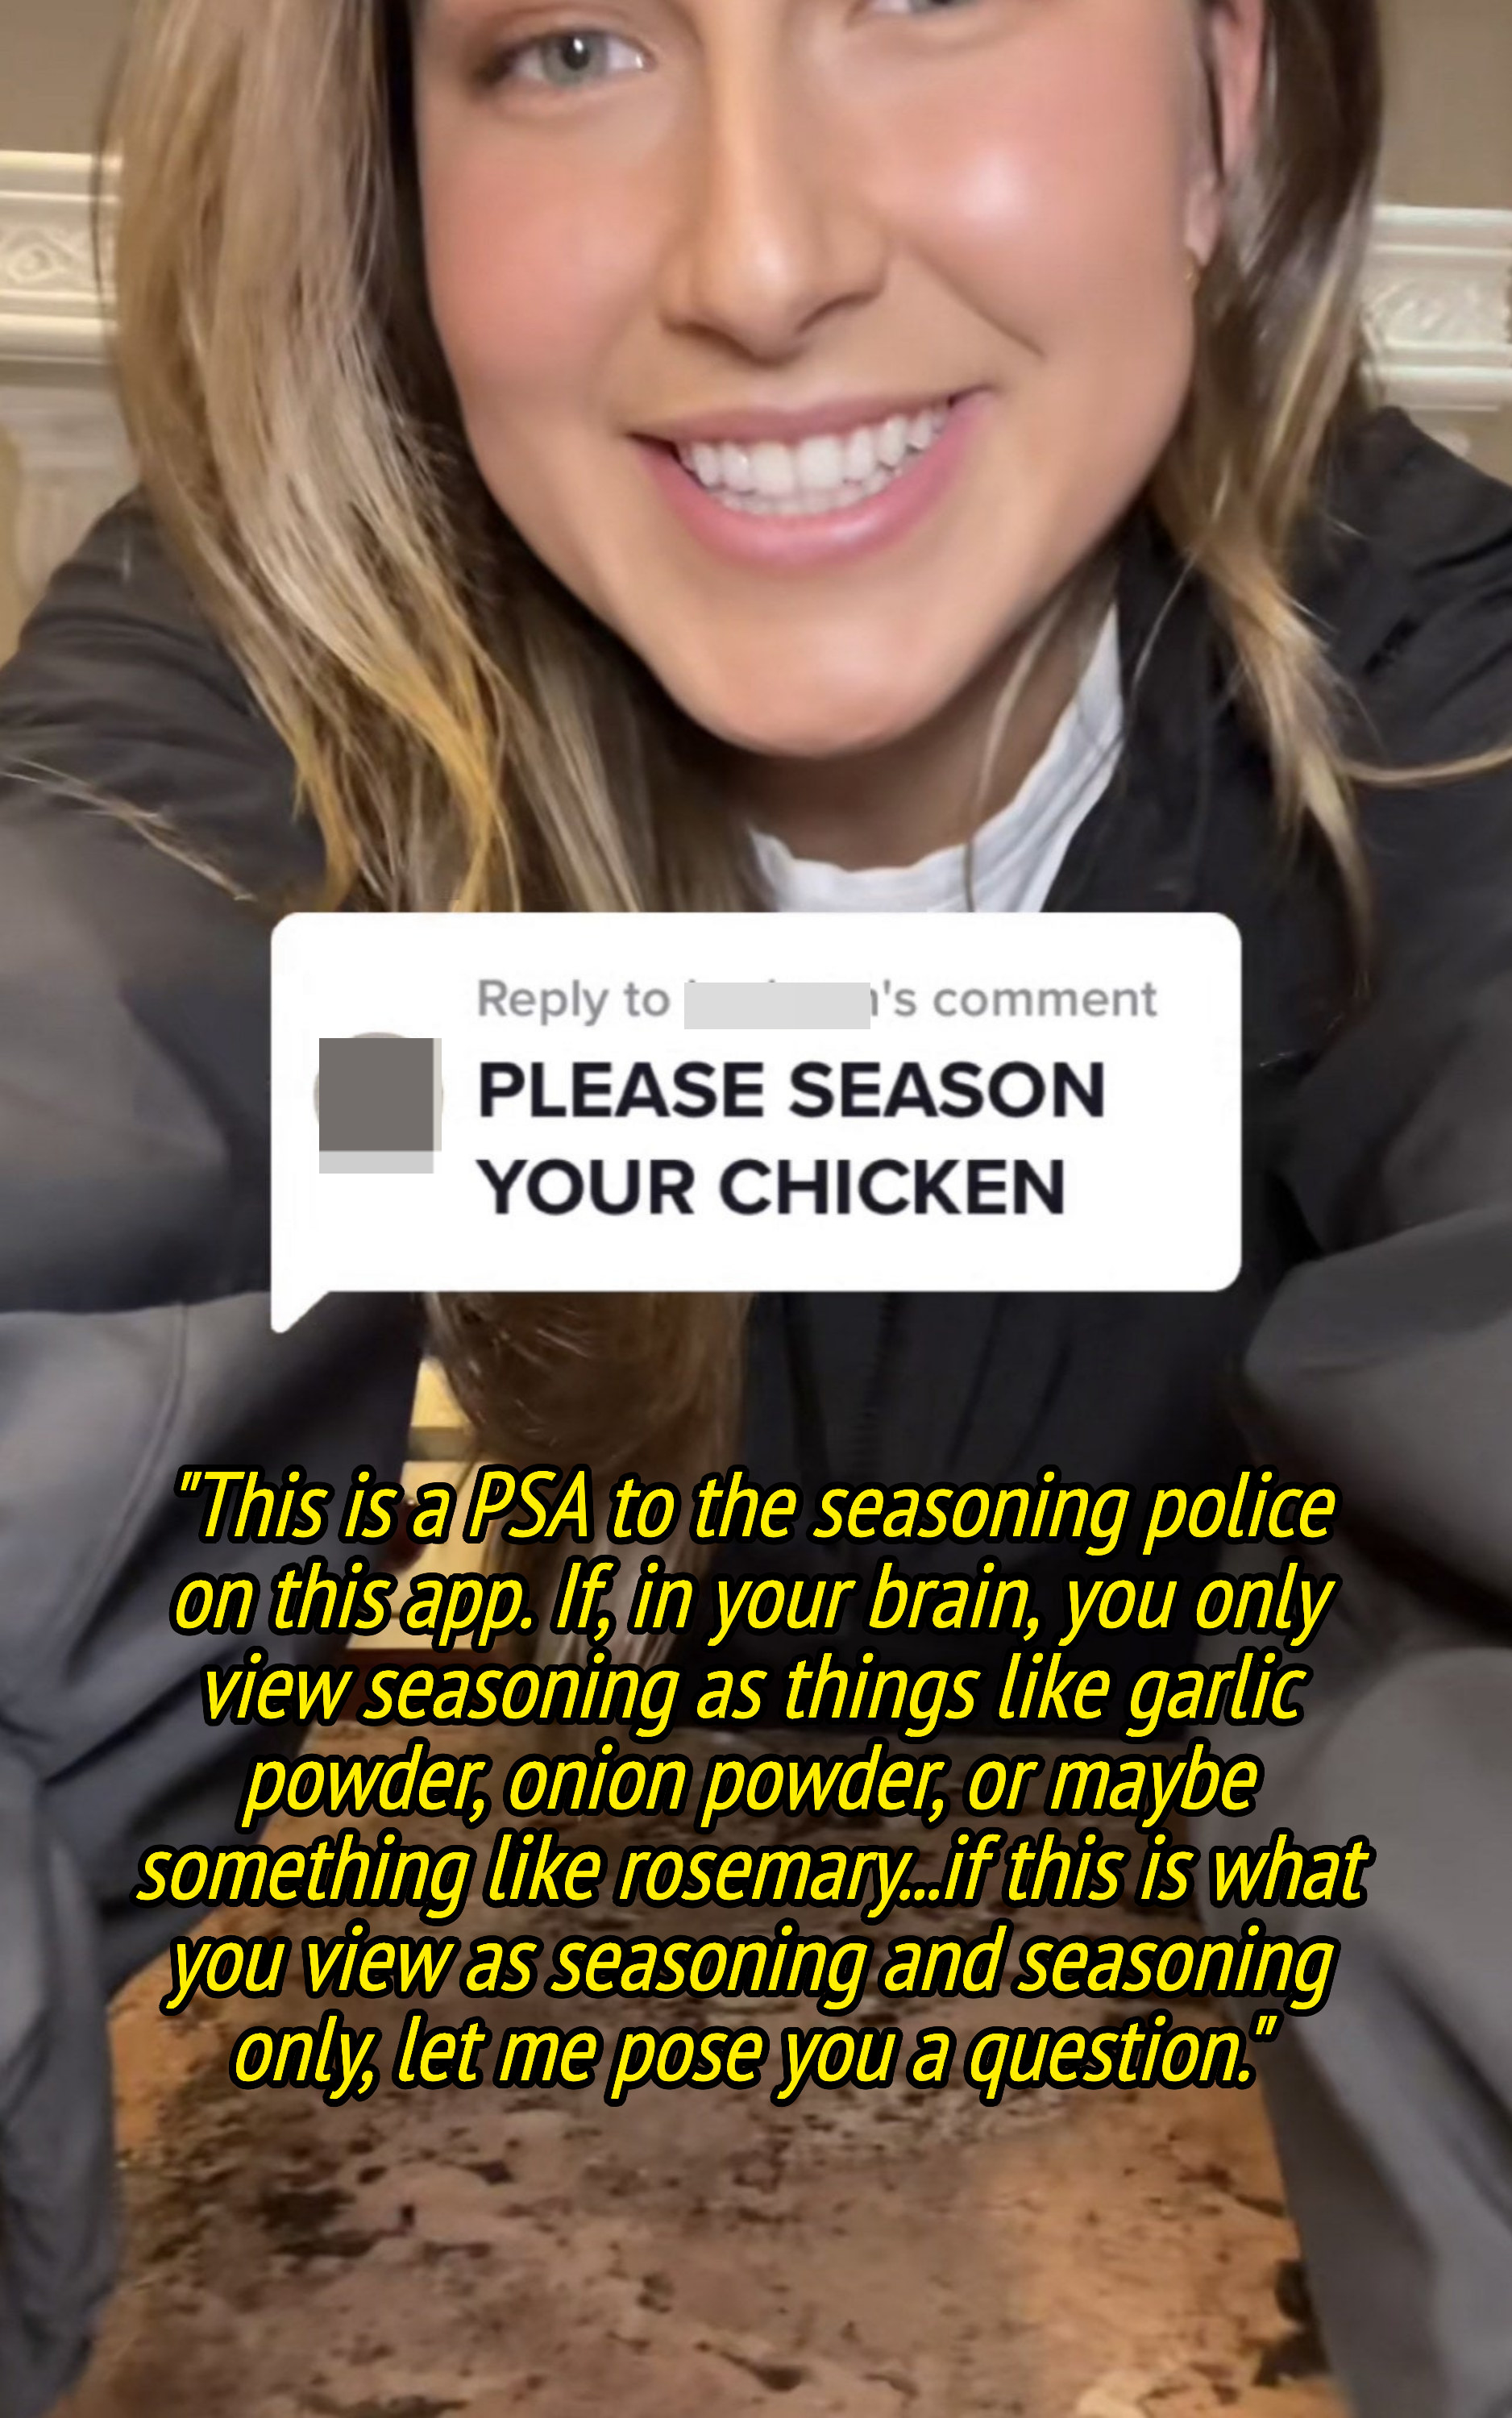 Zoe&#x27;s TikTok, saying: &quot;This is a PSA to the seasoning police on this app; if, in your brain, you only view seasoning as things like garlic powder, onion powder, or maybe something like rosemary. let me pose you a question&quot;